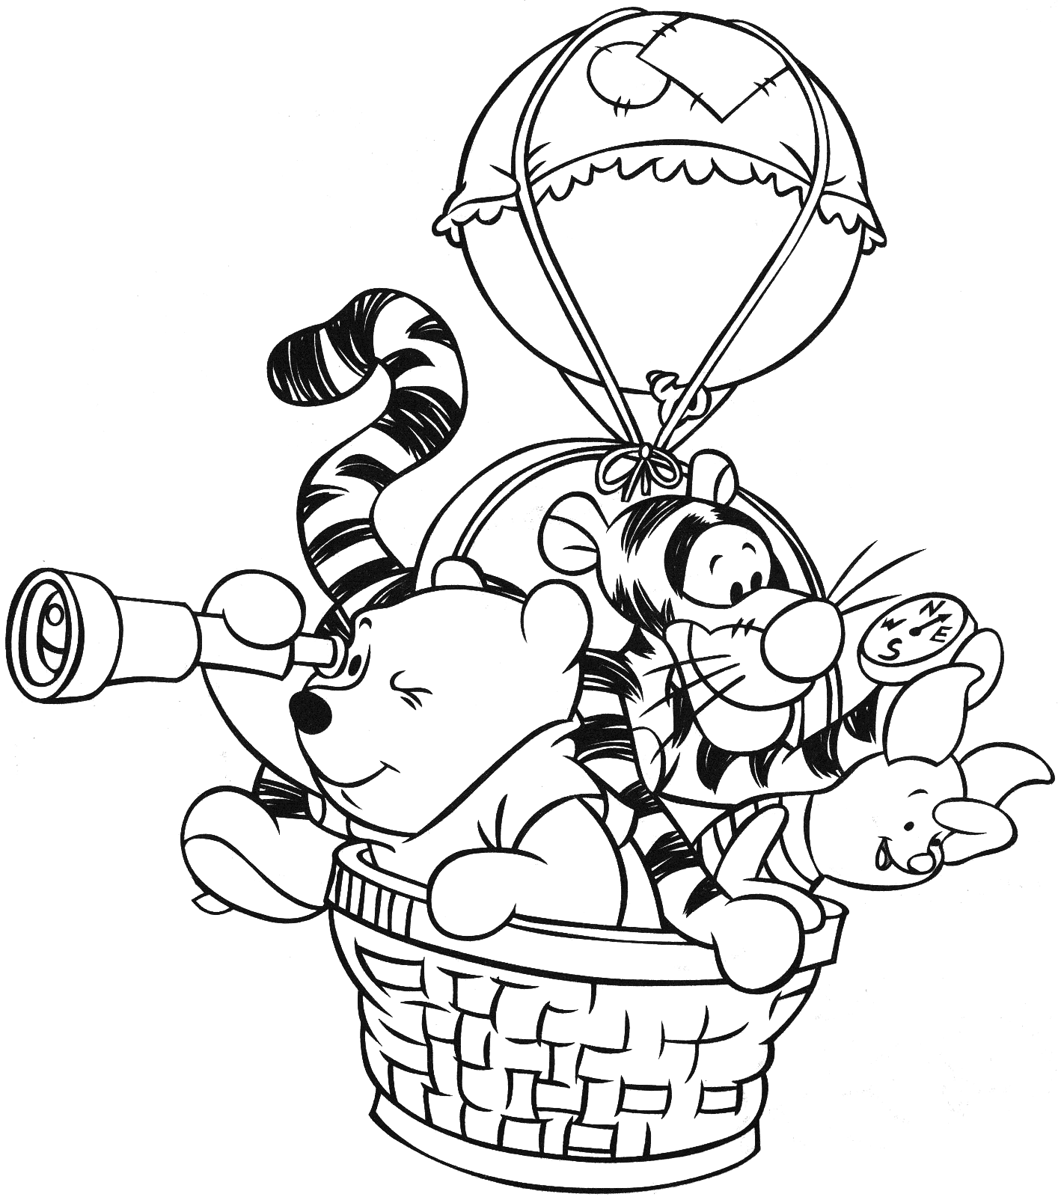 pooh color pooh valentine coloring pages pooh color pooh 